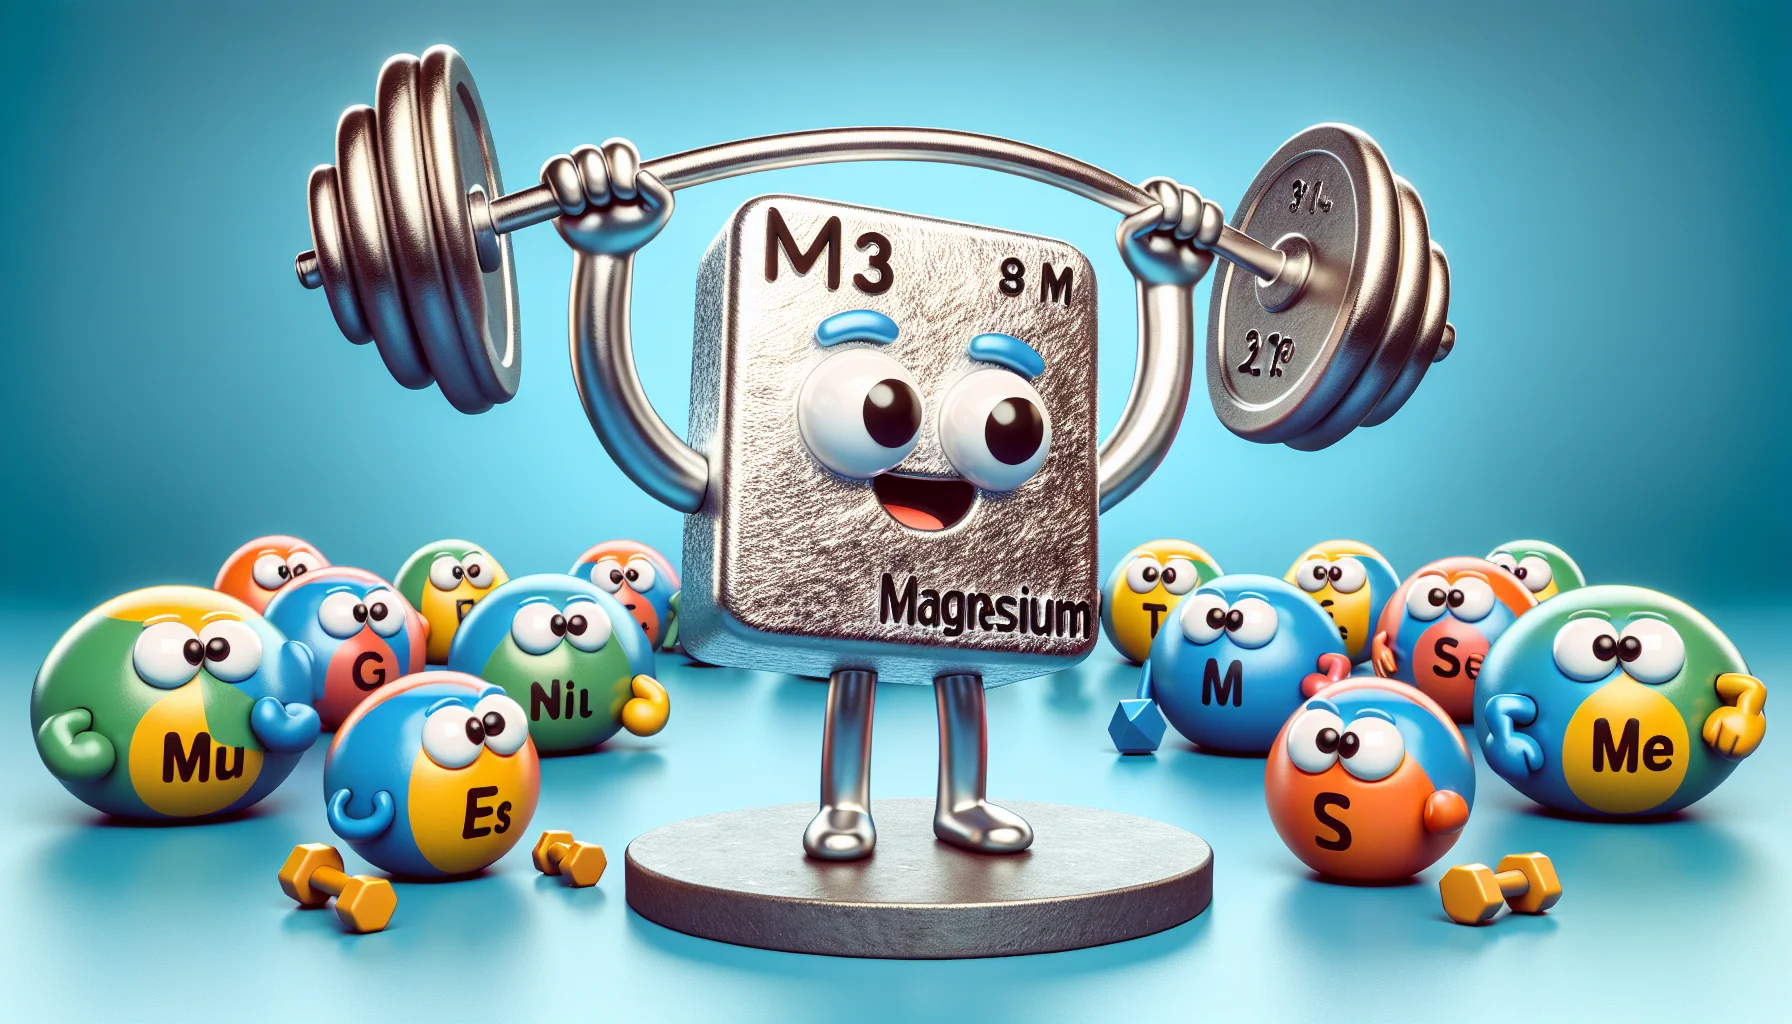 An amusing illustration demonstrating the metallic nature of magnesium, styled as a cartoonish character made of bright, shiny material. The character is lifting weights - a playful nod to its use in sports supplements. It's surrounded by a crowd of other element characters looking at it in awe. One of the elements holds a sign saying, 'Magnesium: Essential for Sports!' Please ensure the characters and symbols follow scientific conventions to maintain the educational context while ensuring an entertaining scene.